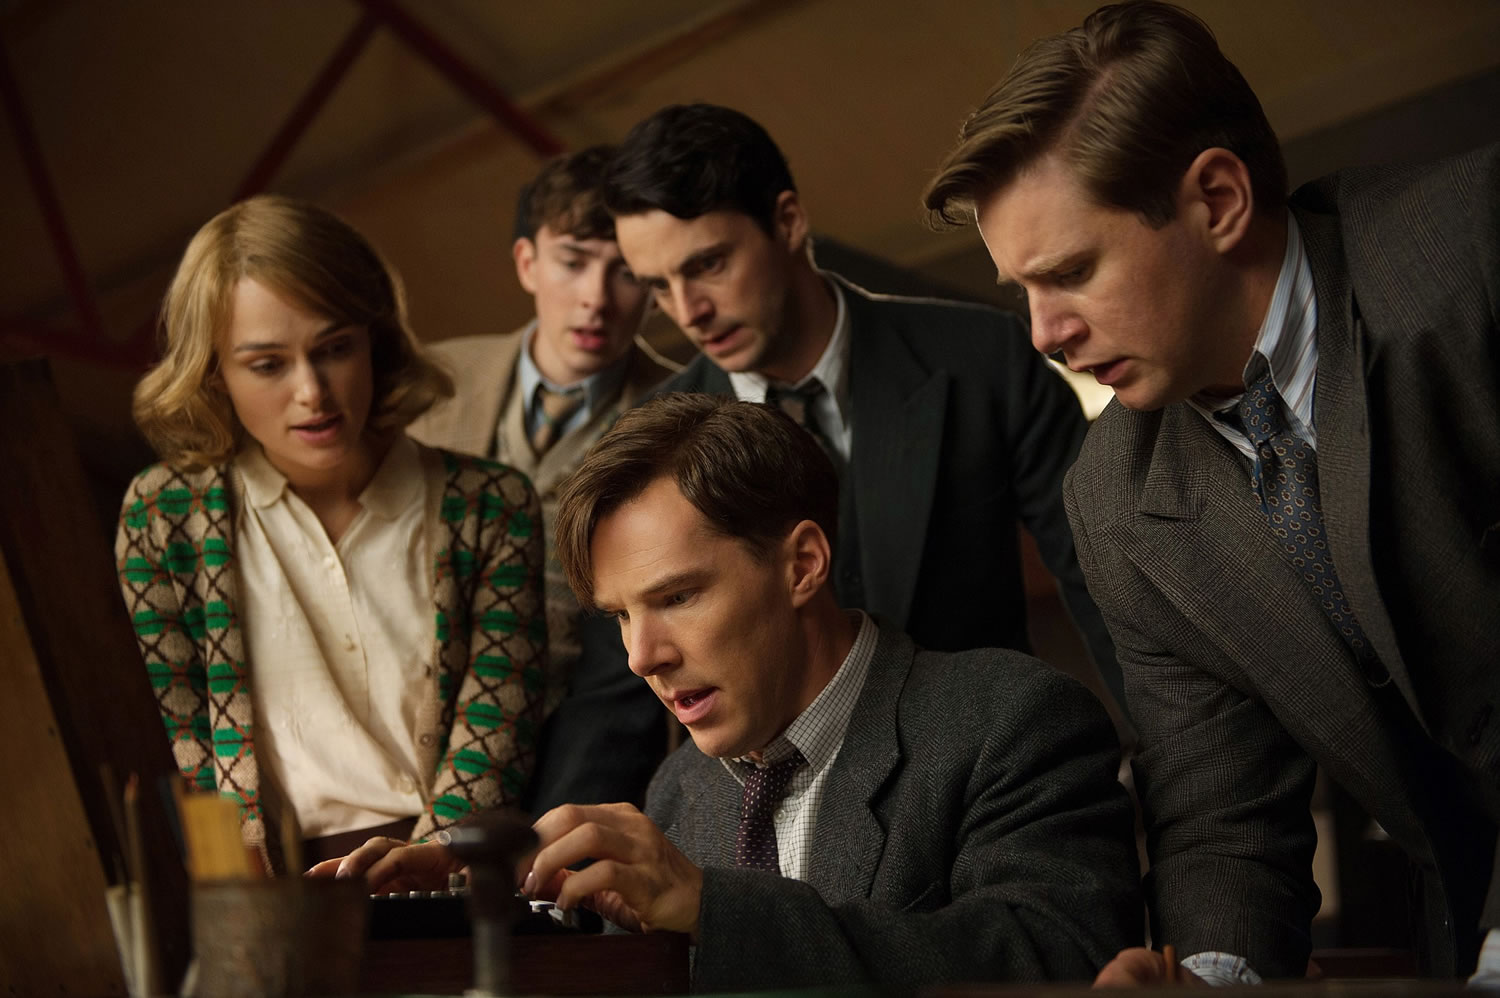 Keira Knightley, clockwise from left, Matthew Beard, Matthew Goode, Allen Leech and Benedict Cumberbatch appear in a scene from the film &quot;The Imitation Game.&quot; The film was nominated for an Oscar for best picture.